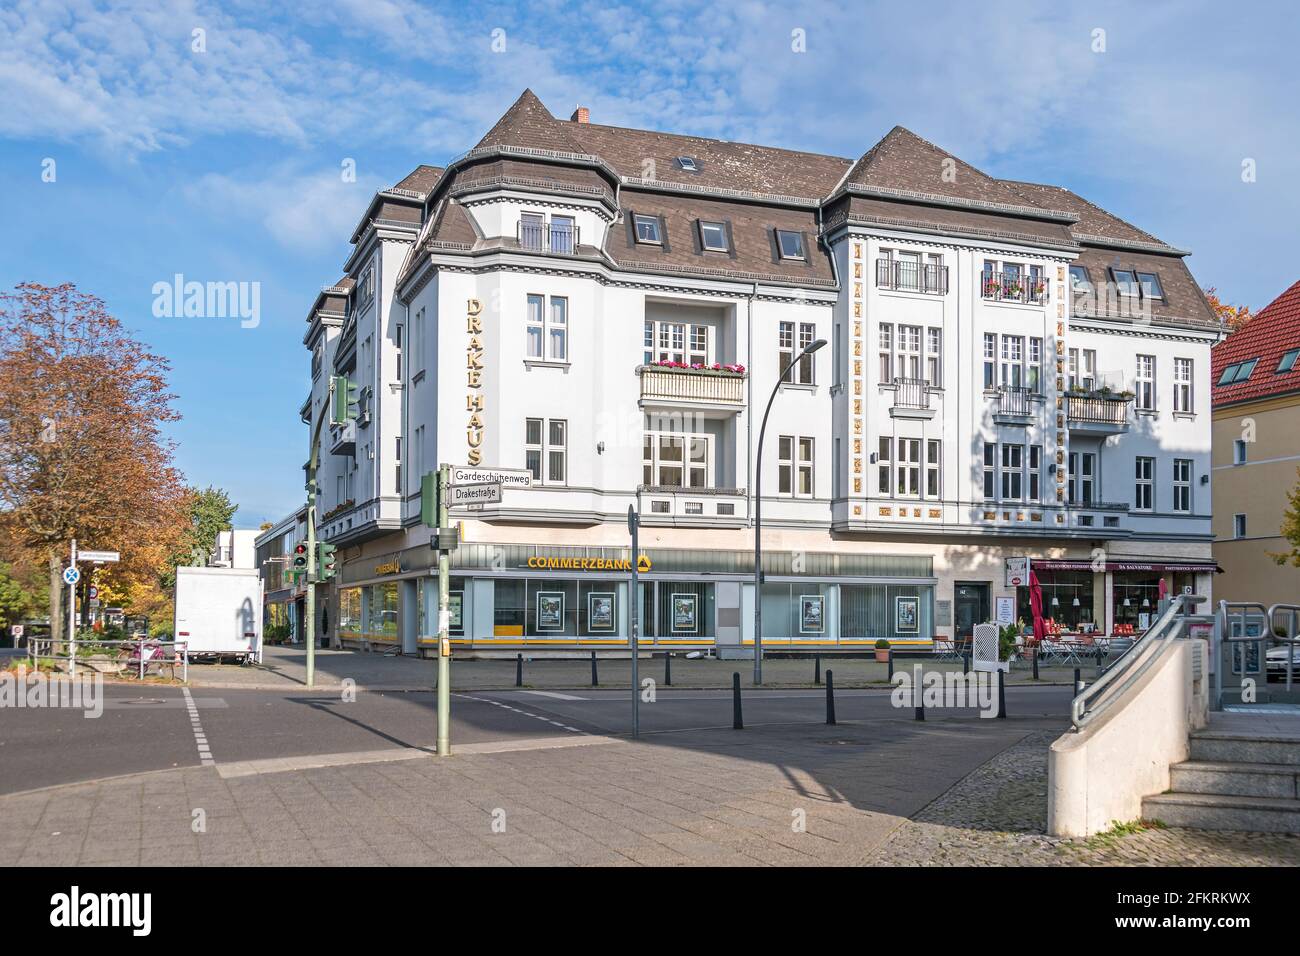 Berlin, Germany - October 25, 2020: Drake-Haus, a residential building of the 19th-century Villenkolonie, a German concept of settlements completely m Stock Photo